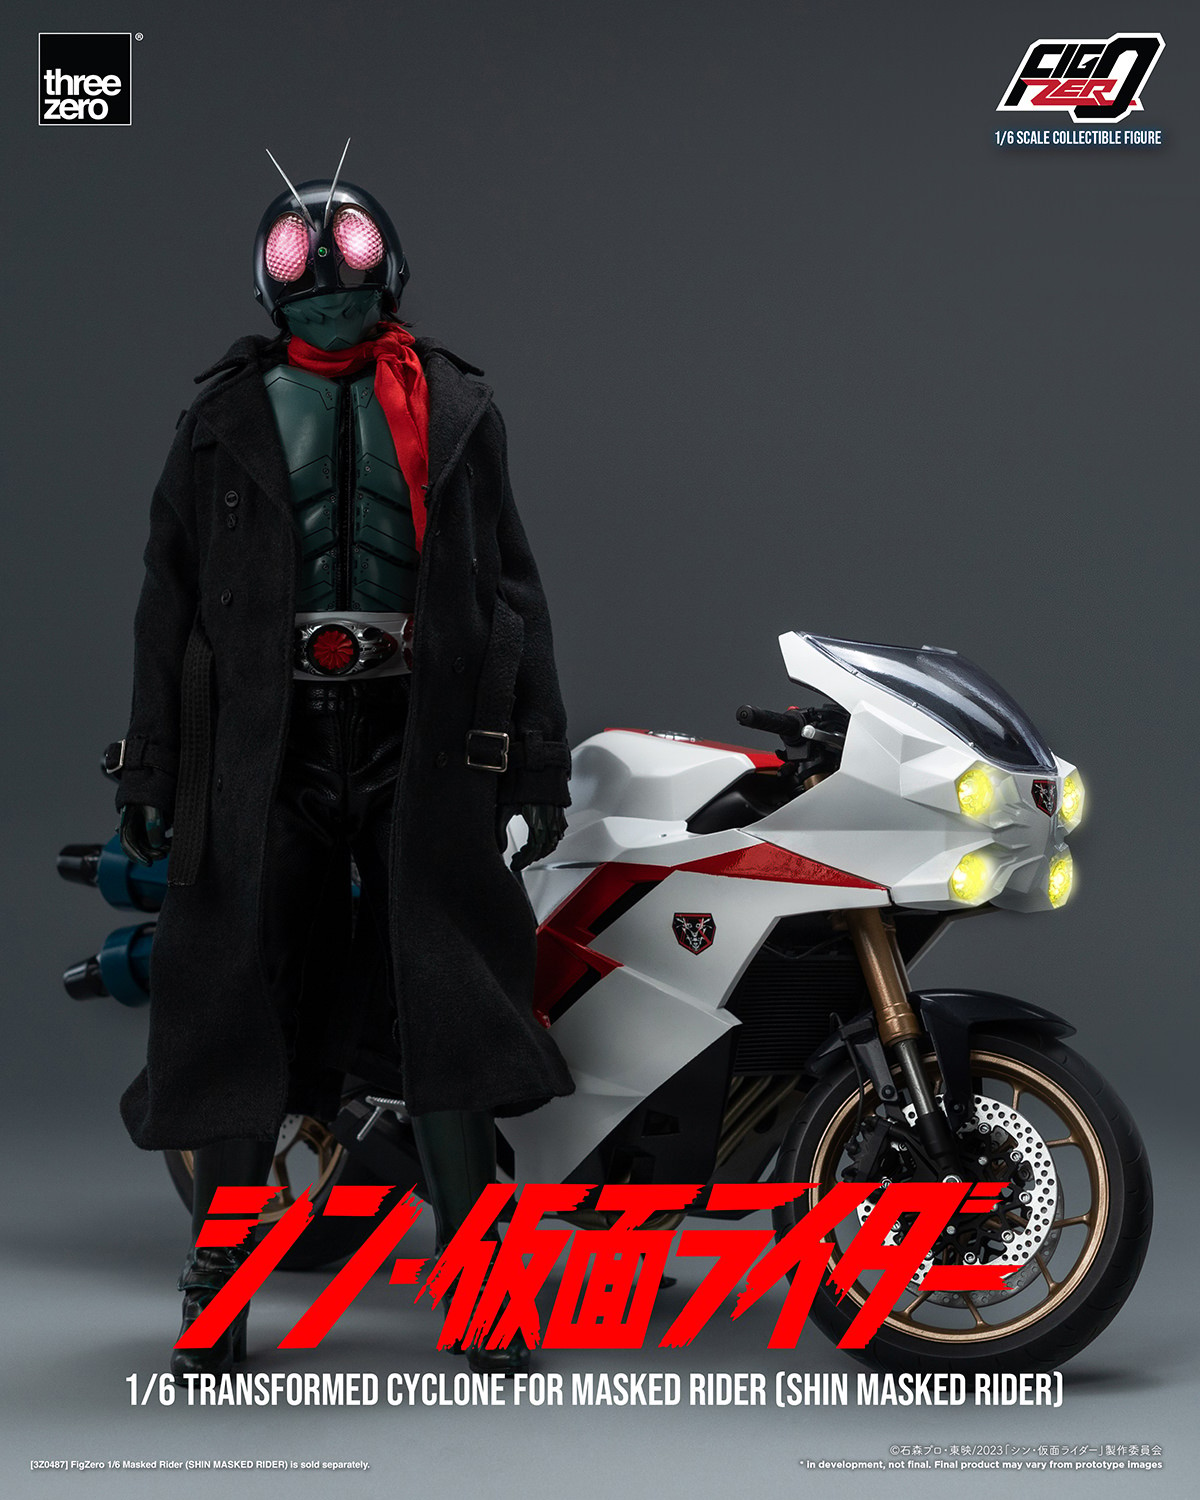 Transformed Cyclone for Masked Rider (Shin Masked Rider) (Prototype Shown) View 19